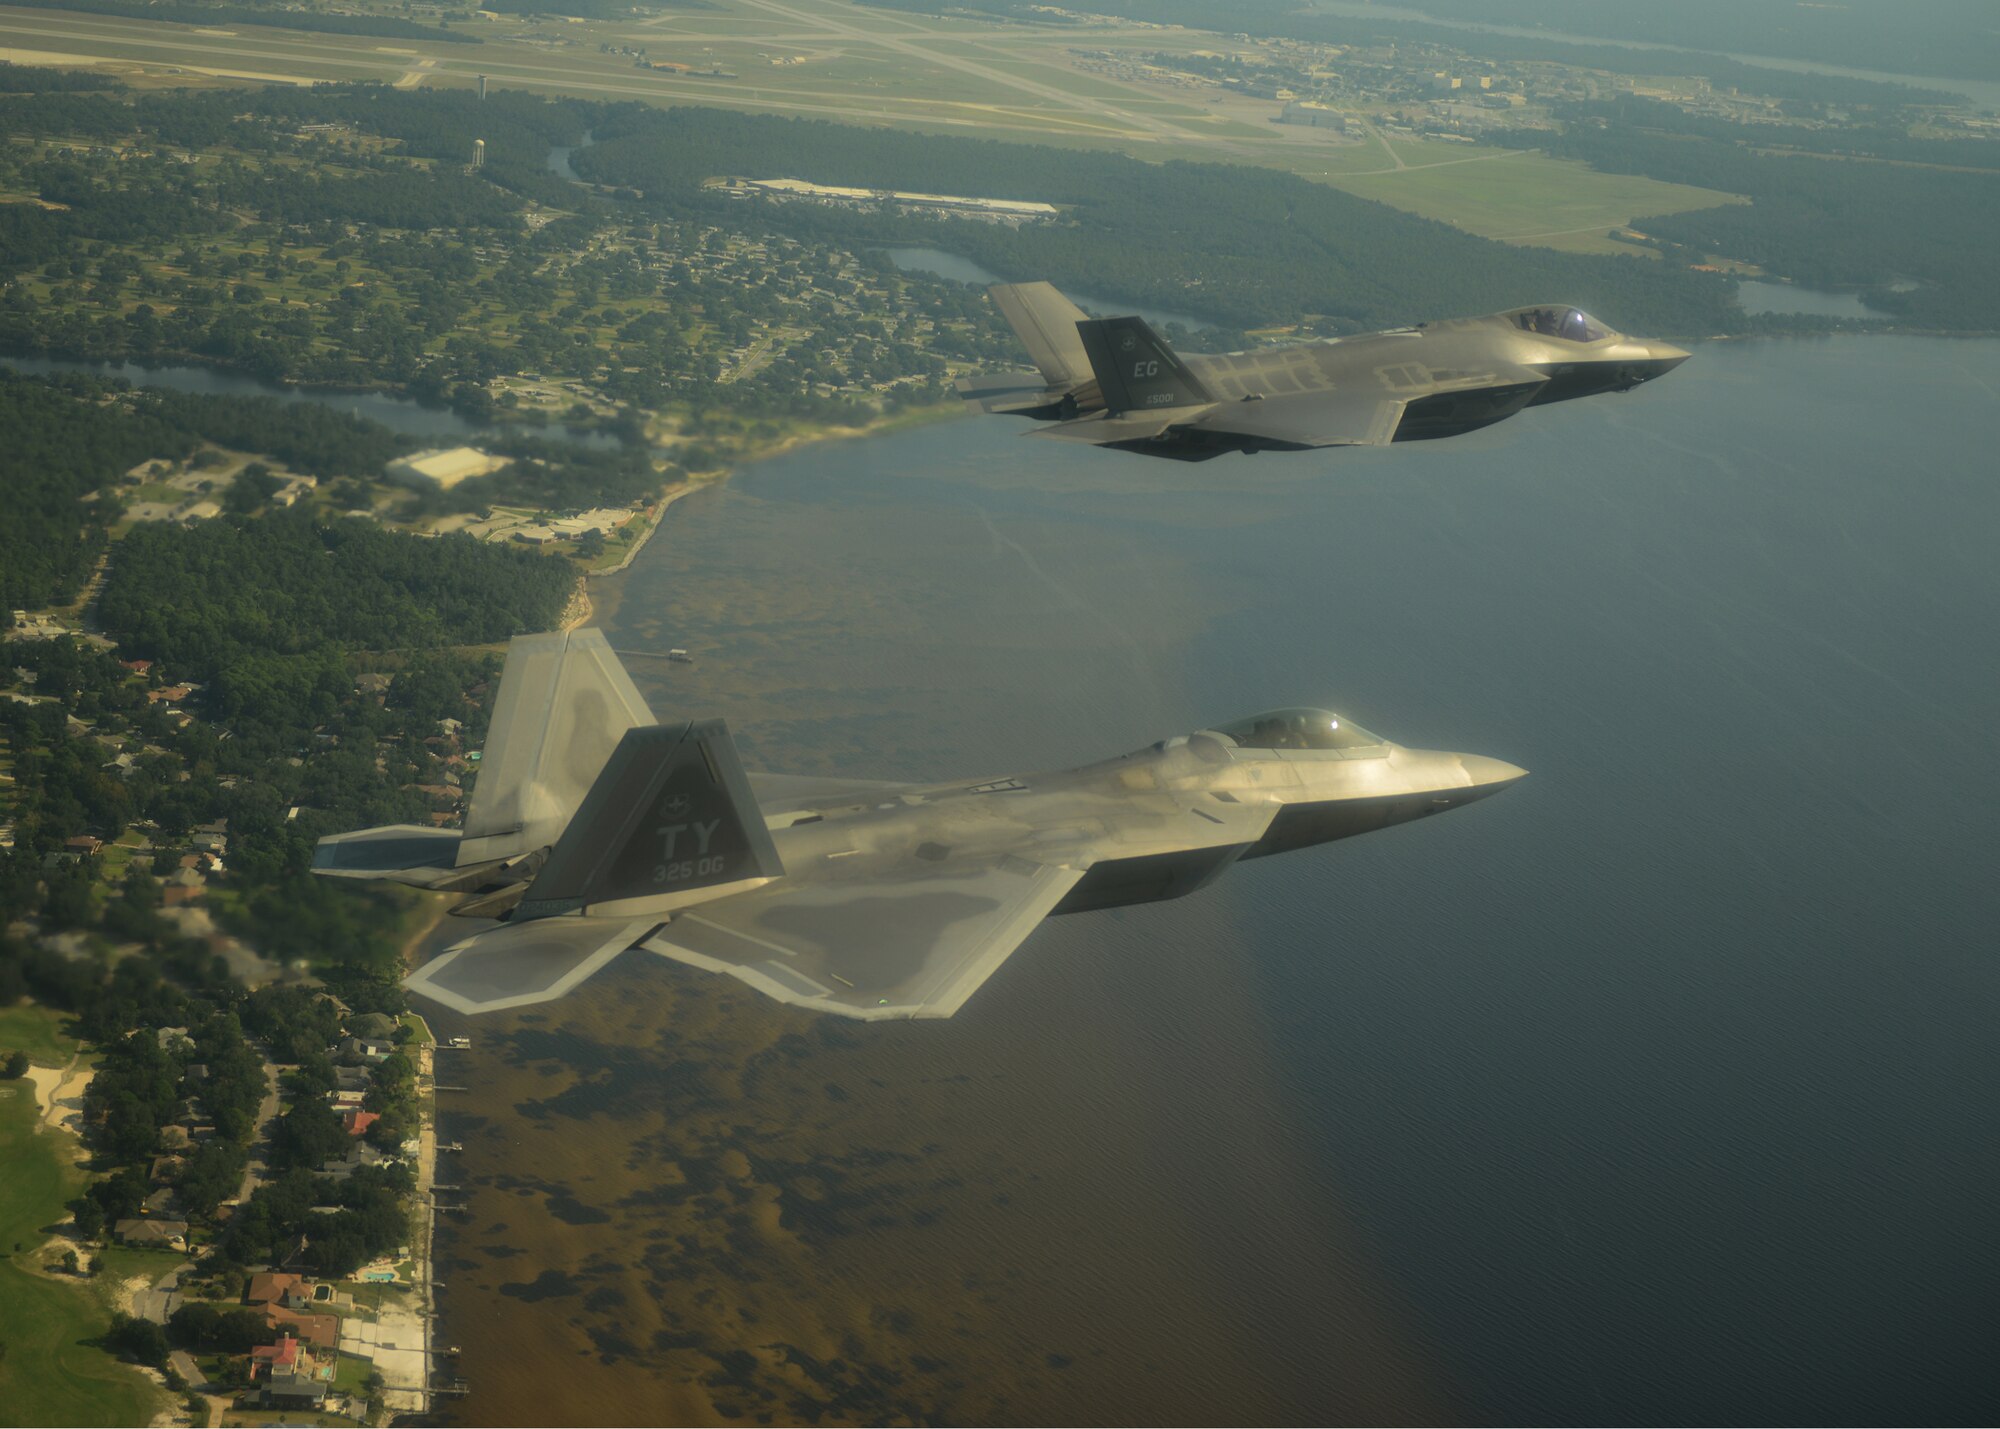 An F-22A Raptor, foreground, from the 43rd Fighter Squadron at Tyndall Air Force Base, Fla., and an F-35A Lightning II joint strike fighter from the 33rd Fighter Wing at Eglin Air Force Base, Fla., soar over the Emerald Coast Sept. 19, 2012. This was the first time the two fifth-generation fighters have flown together for the Air Force. (U.S. Air Force photo/Master Sgt. Jeremy T. Lock)